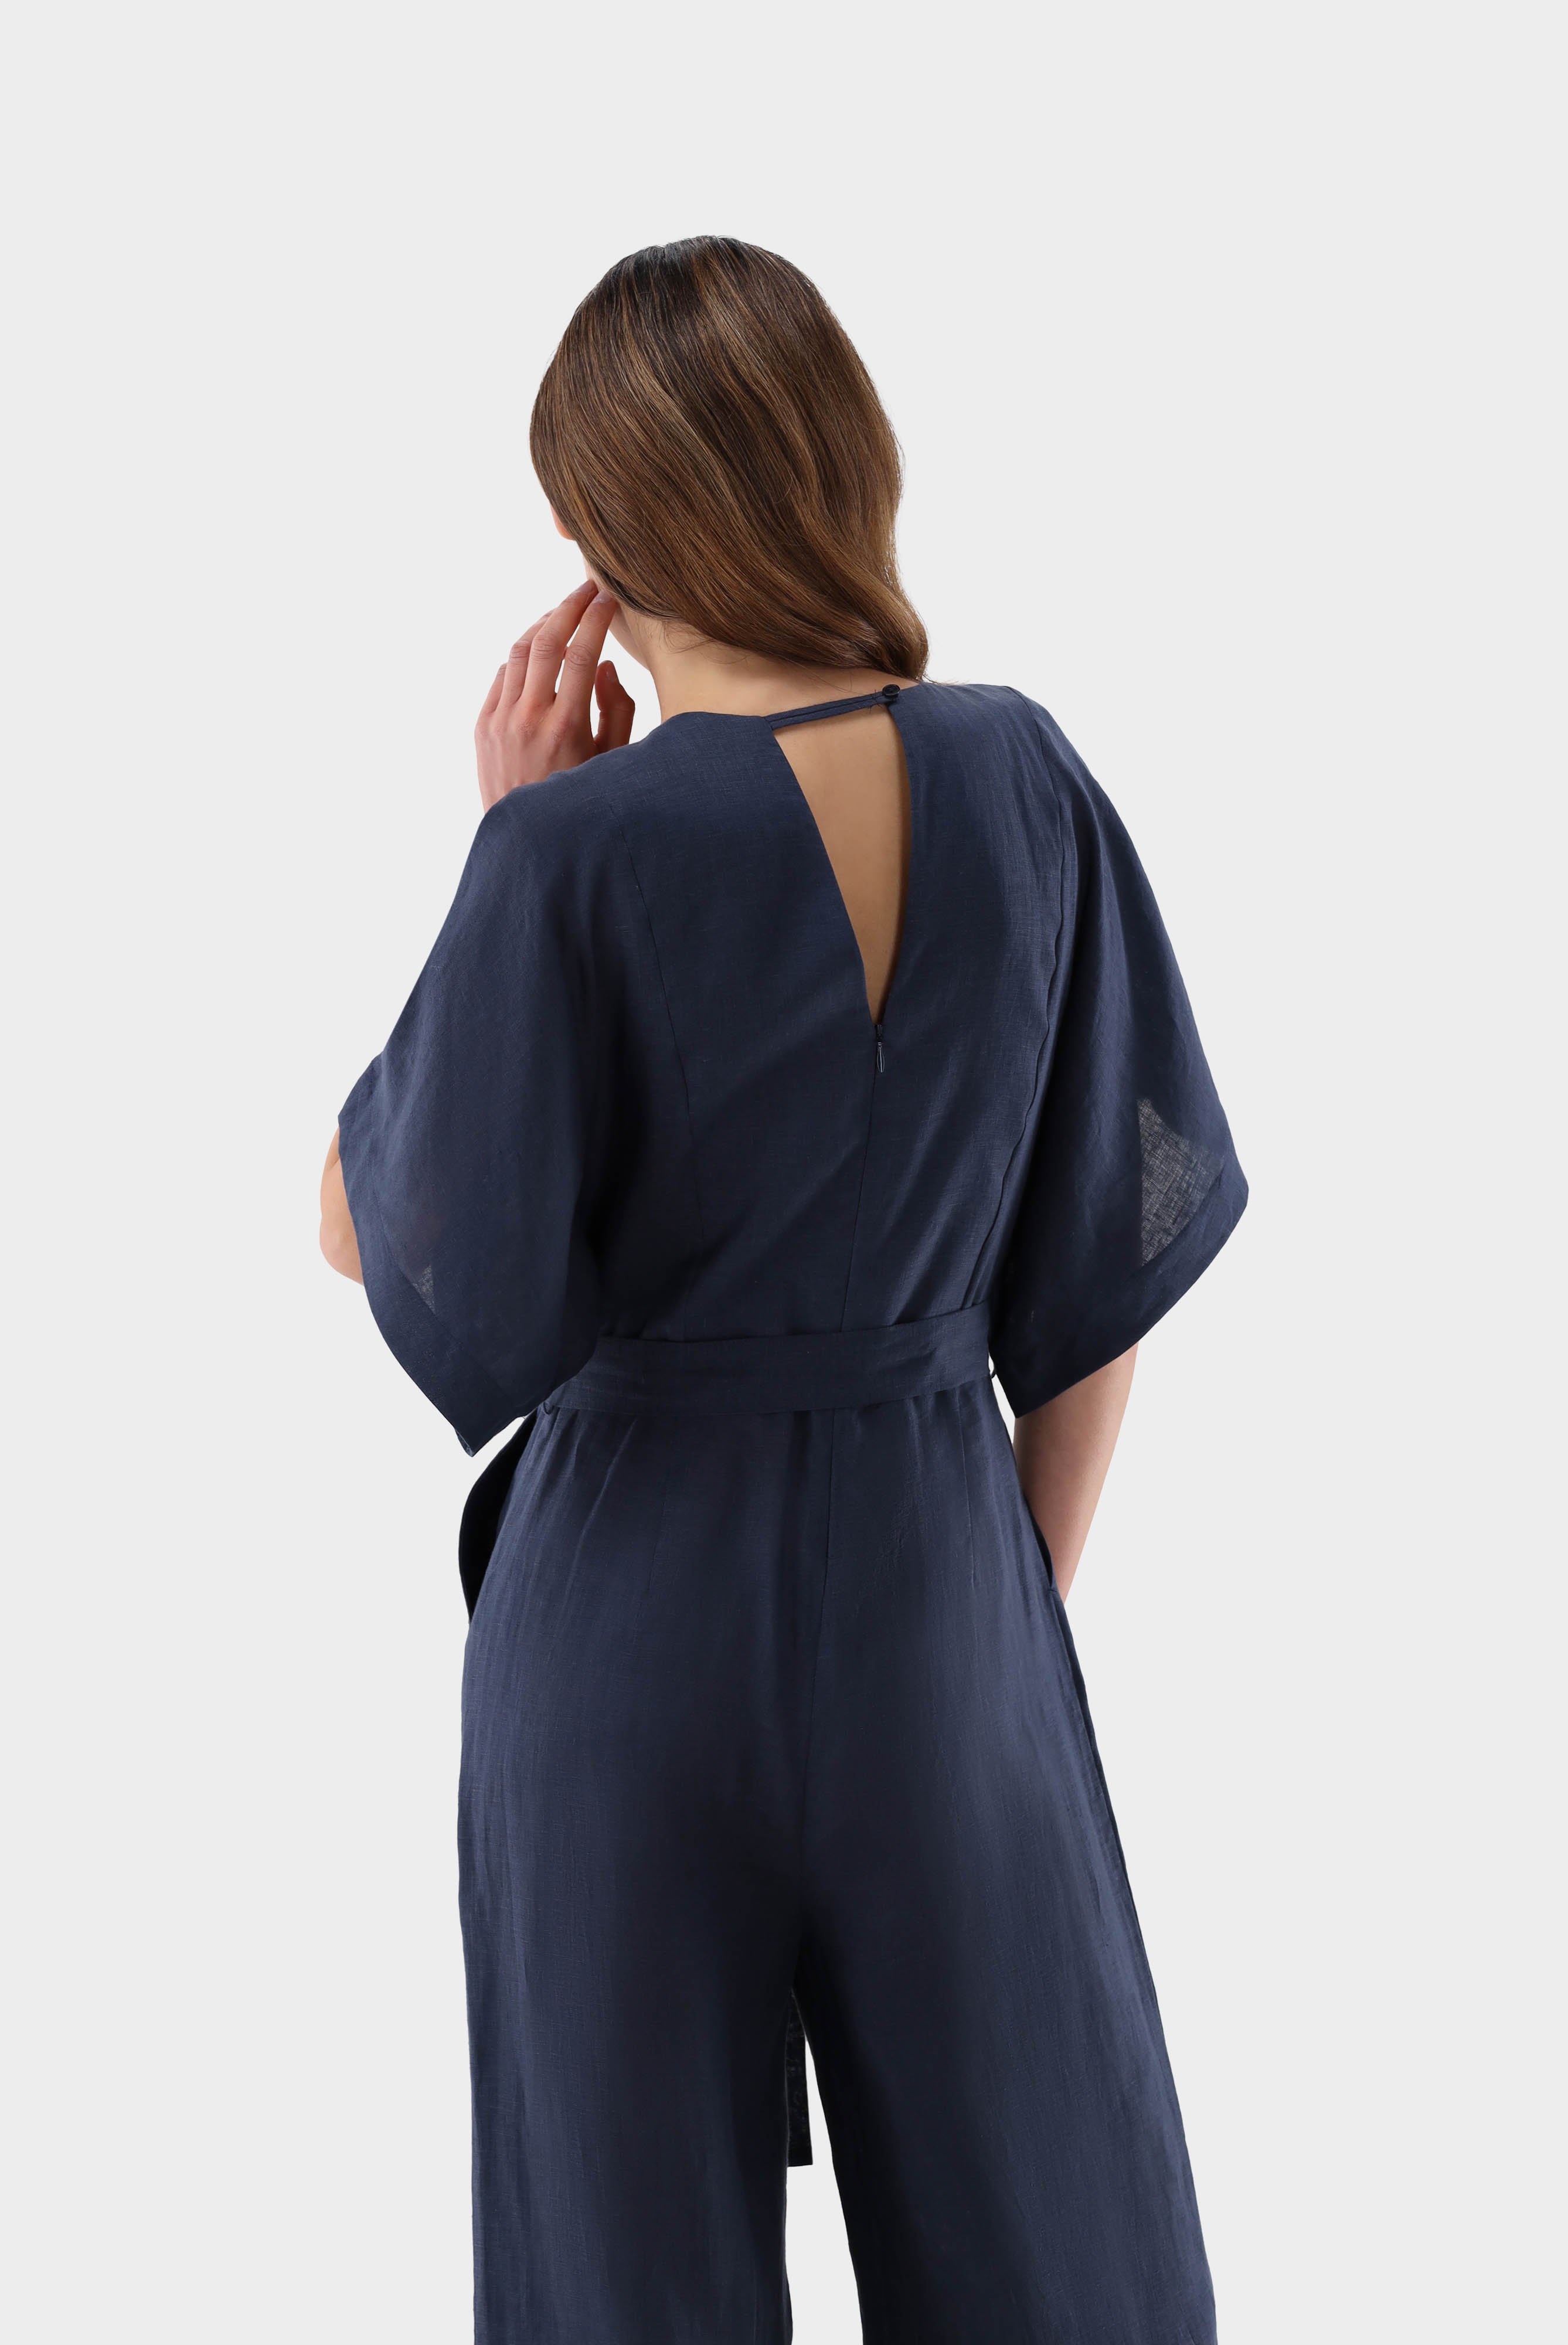 Jeans & Trousers+Jumpsuit with wide Sleeves in Super-Soft Linen+05.658Q.22.150555.785.36